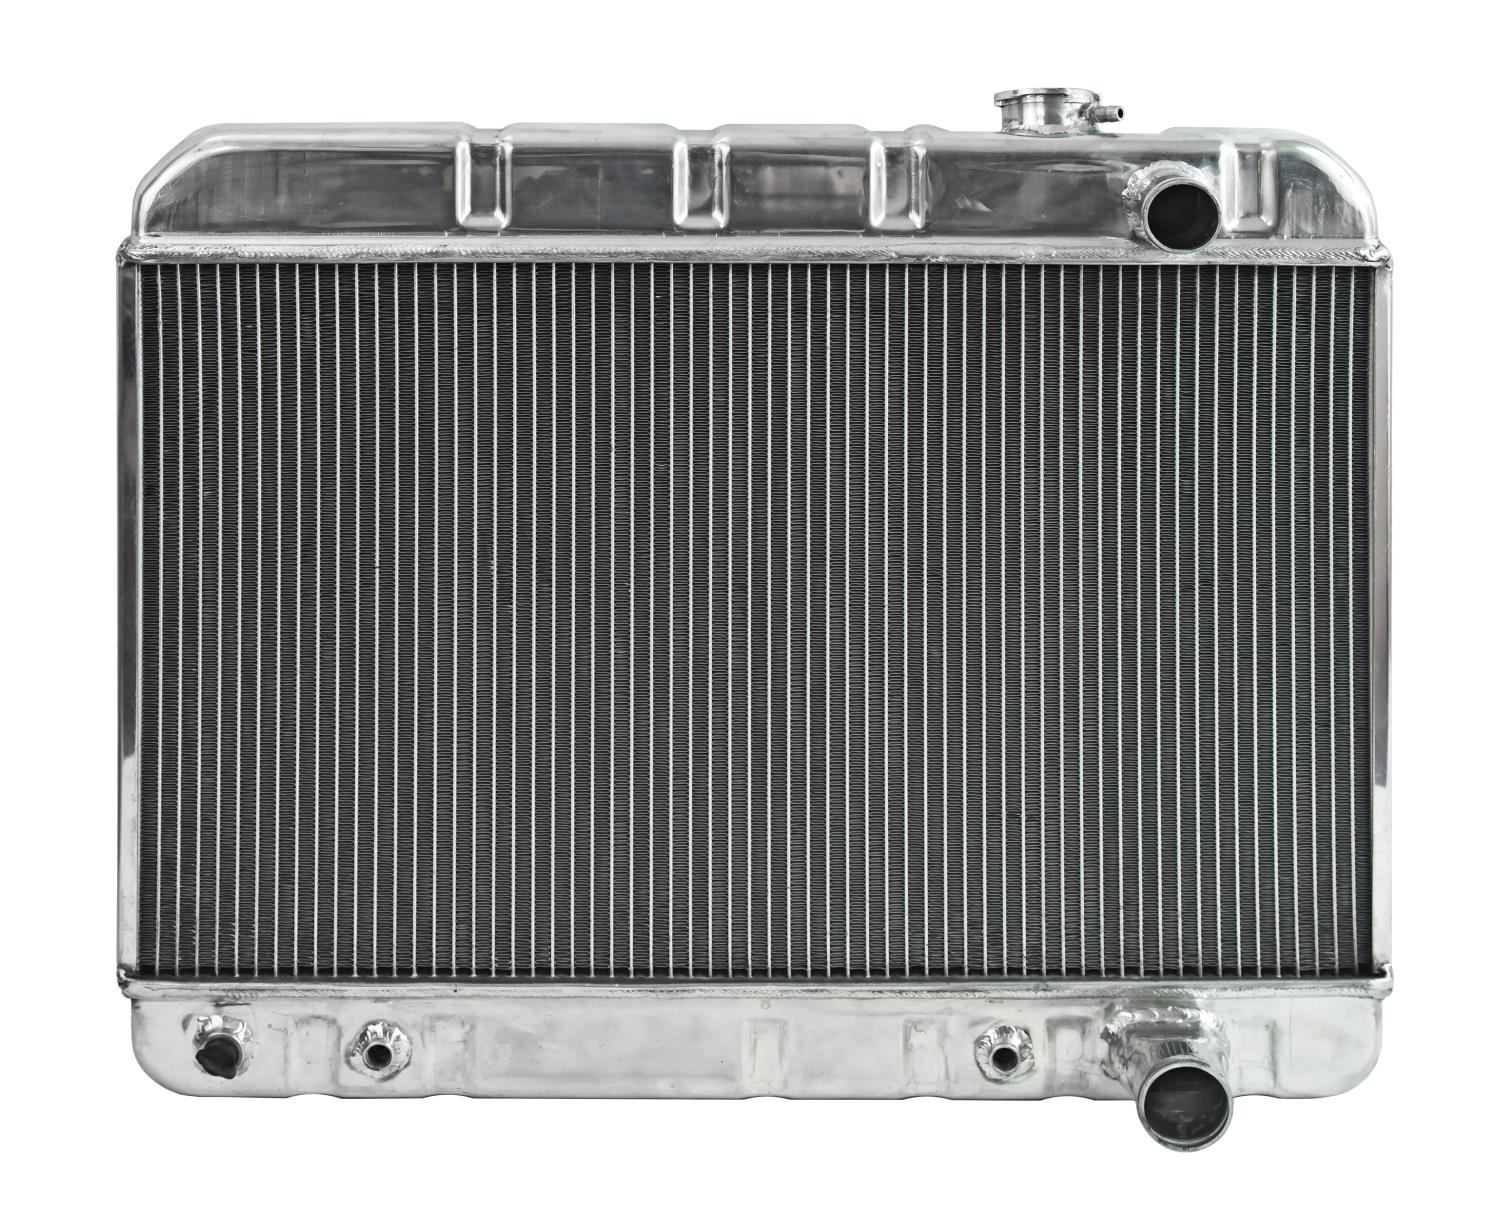 Reproduction Aluminum Radiator for 1964-1965 Pontiac GTO, LeMans, & Tempest Without Air Conditioning